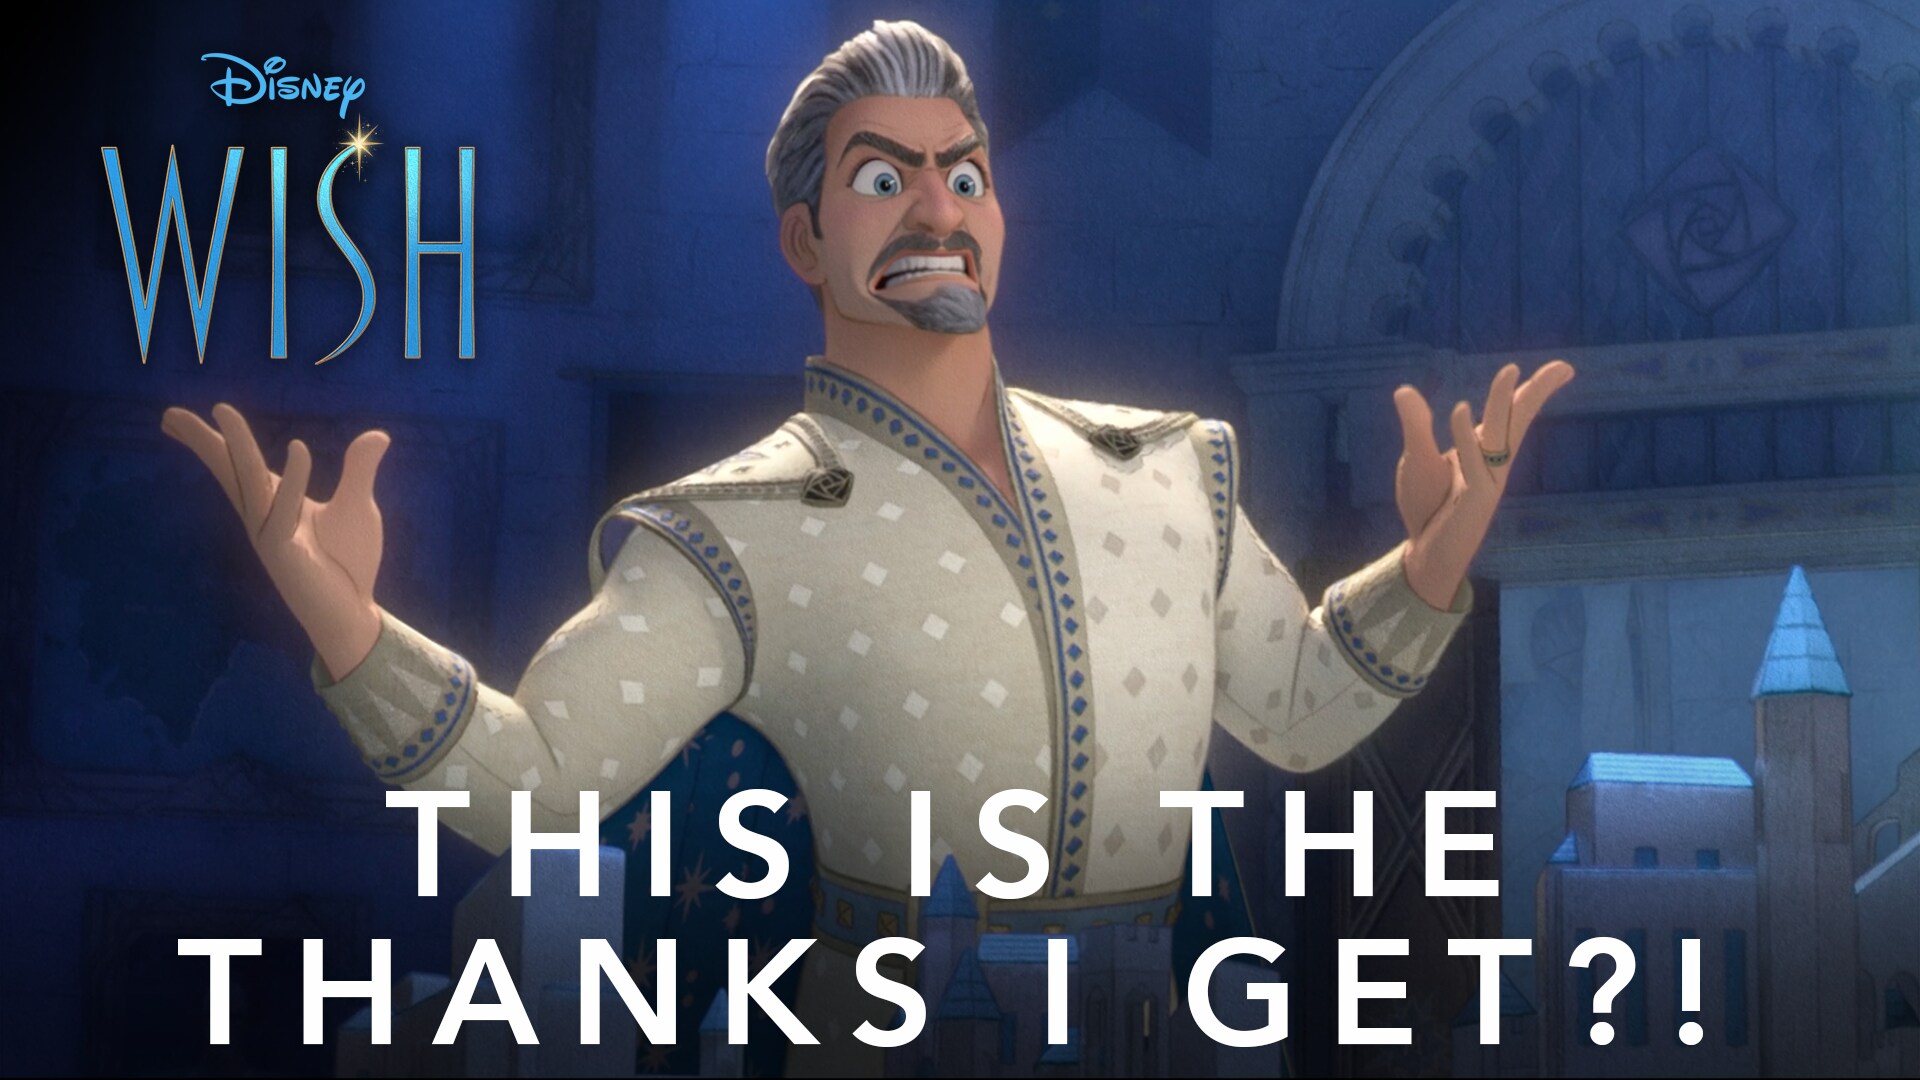 Disney's Wish | "This Is The Thanks I Get?!"